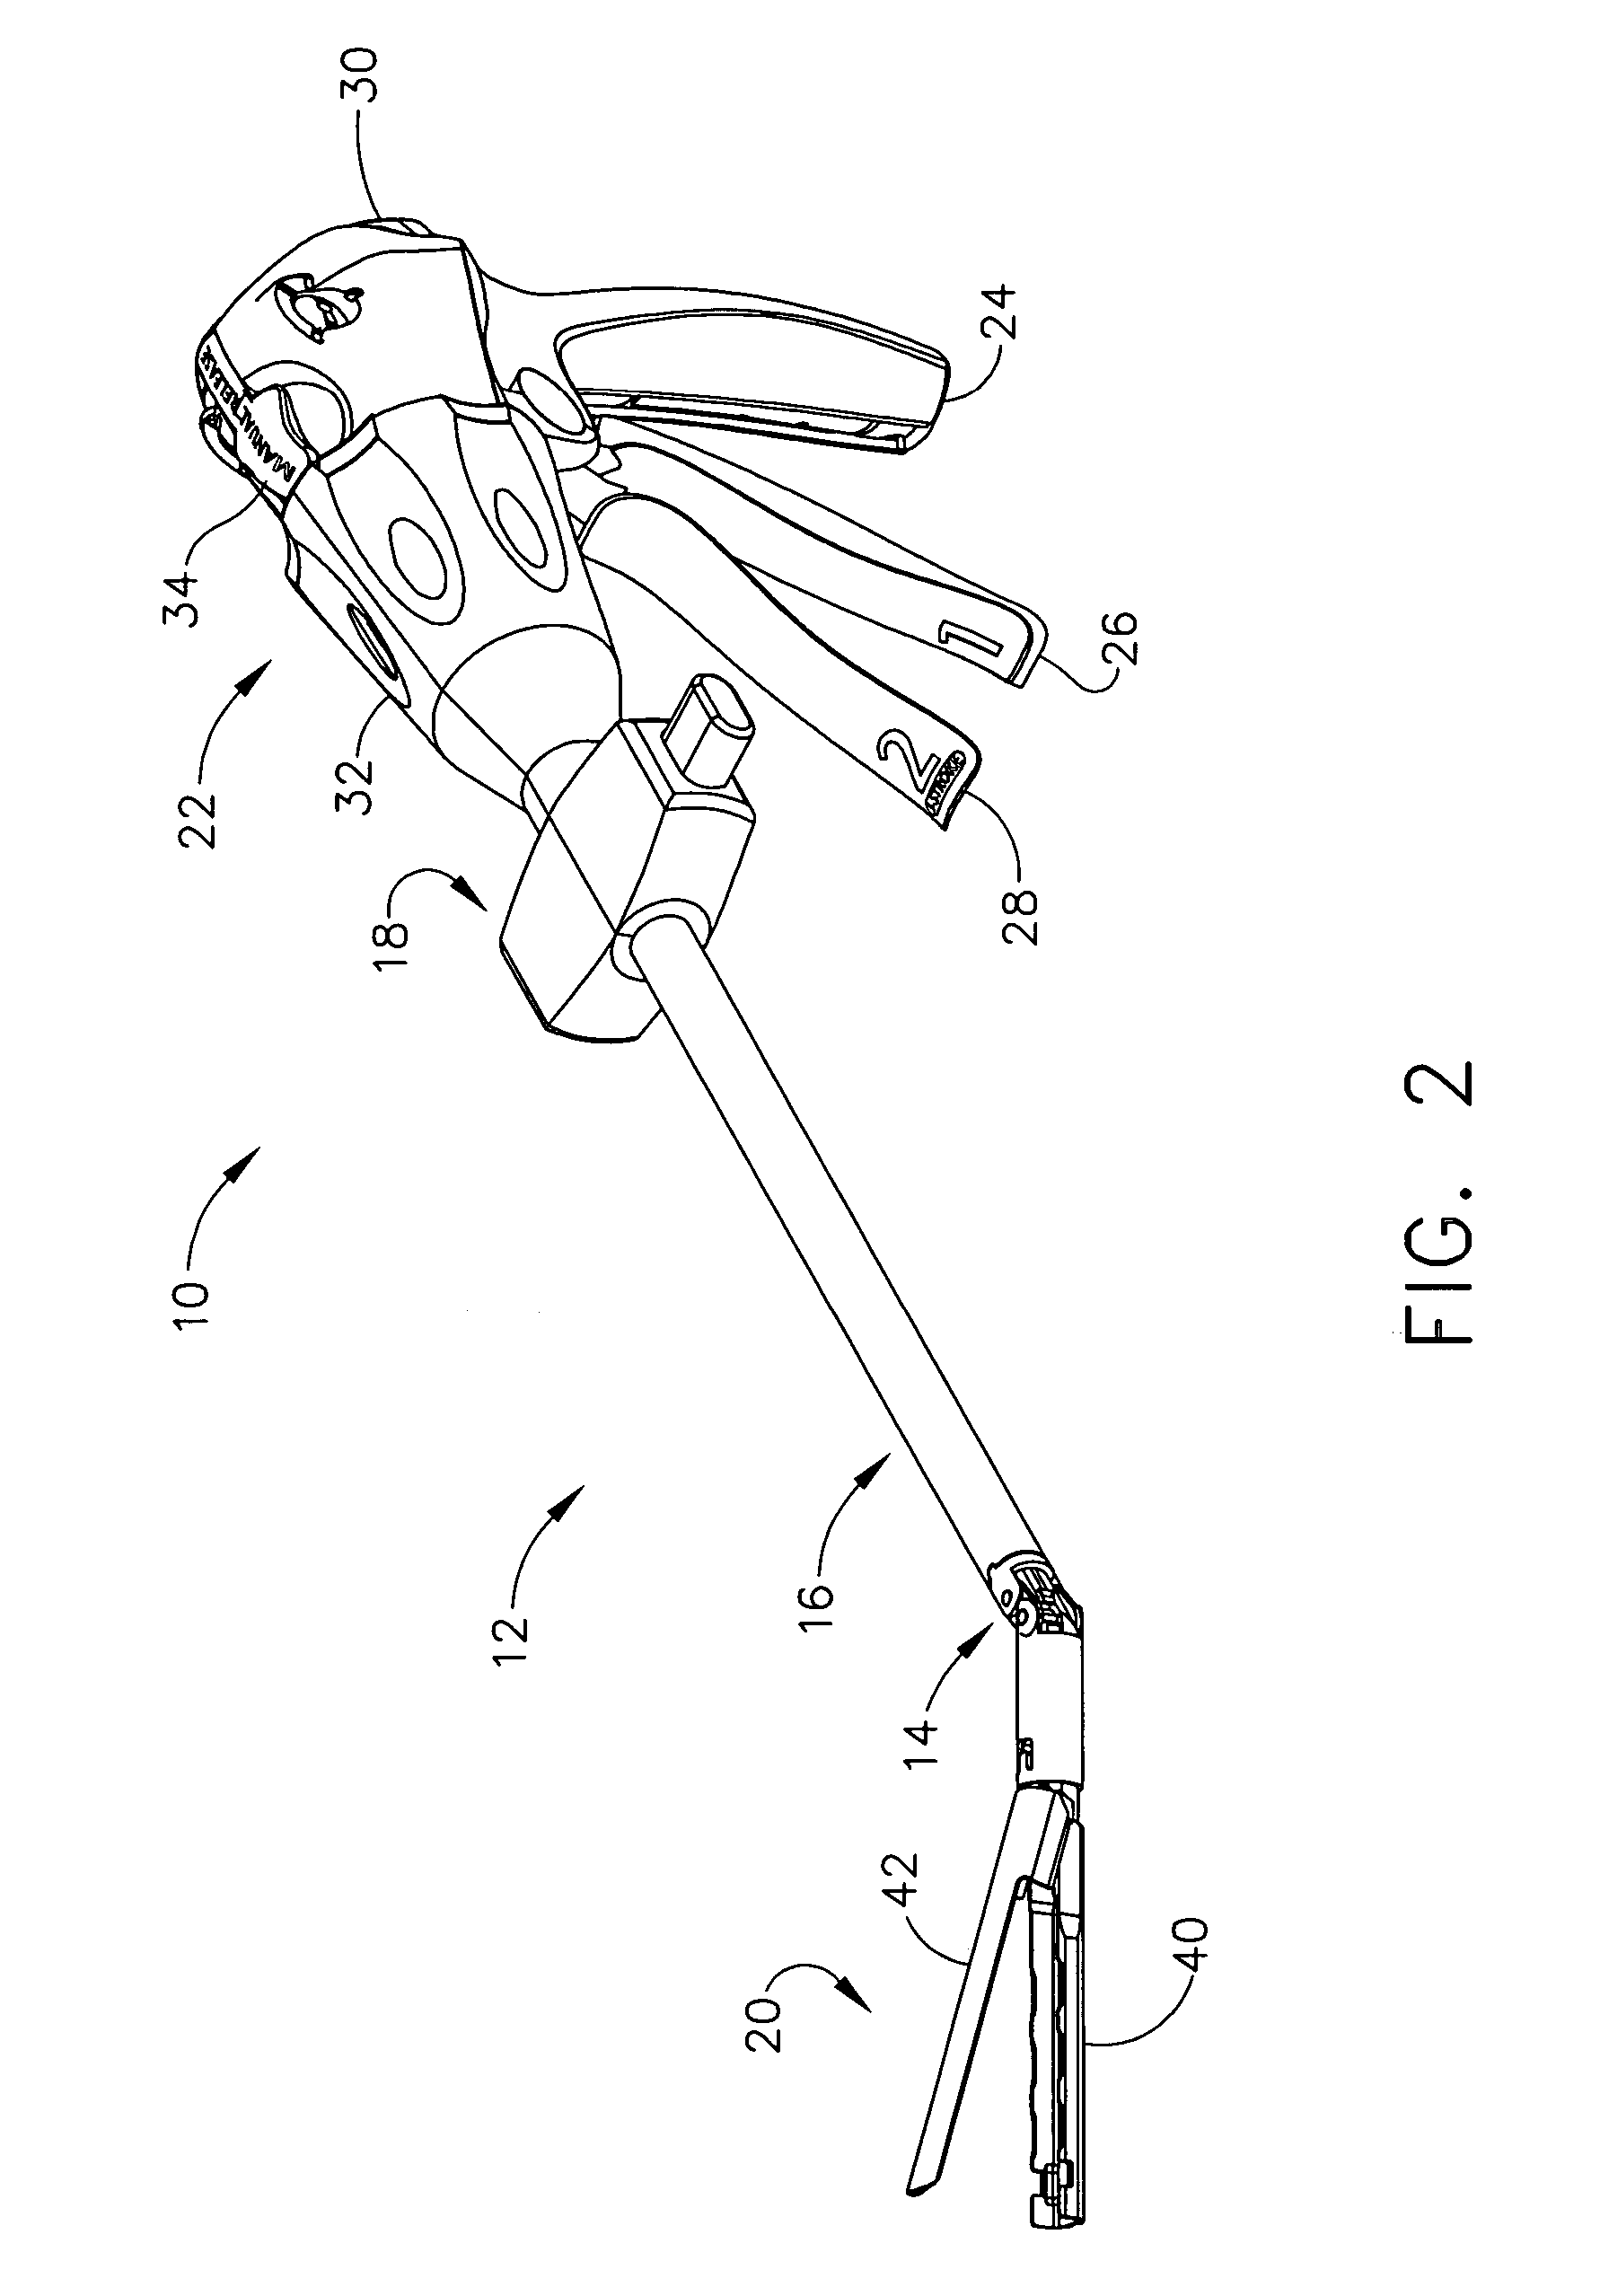 Surgical instrument with articulating shaft with rigid firing bar supports